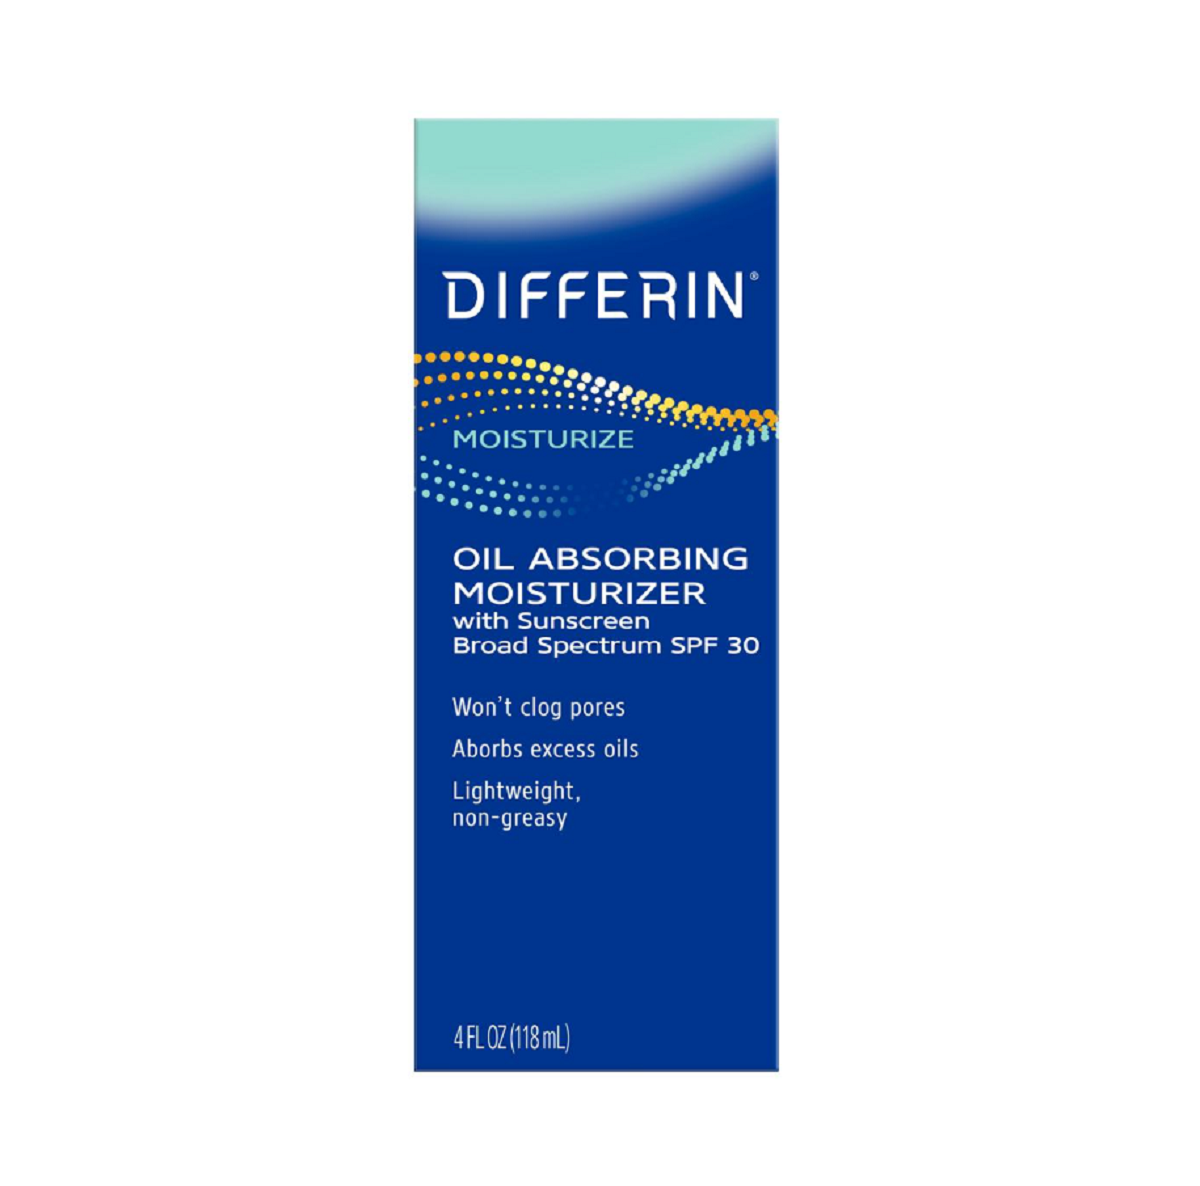 Differin Oil Absorbing Moisturizer - SPF 30, Differin Acne Product Printable Coupon